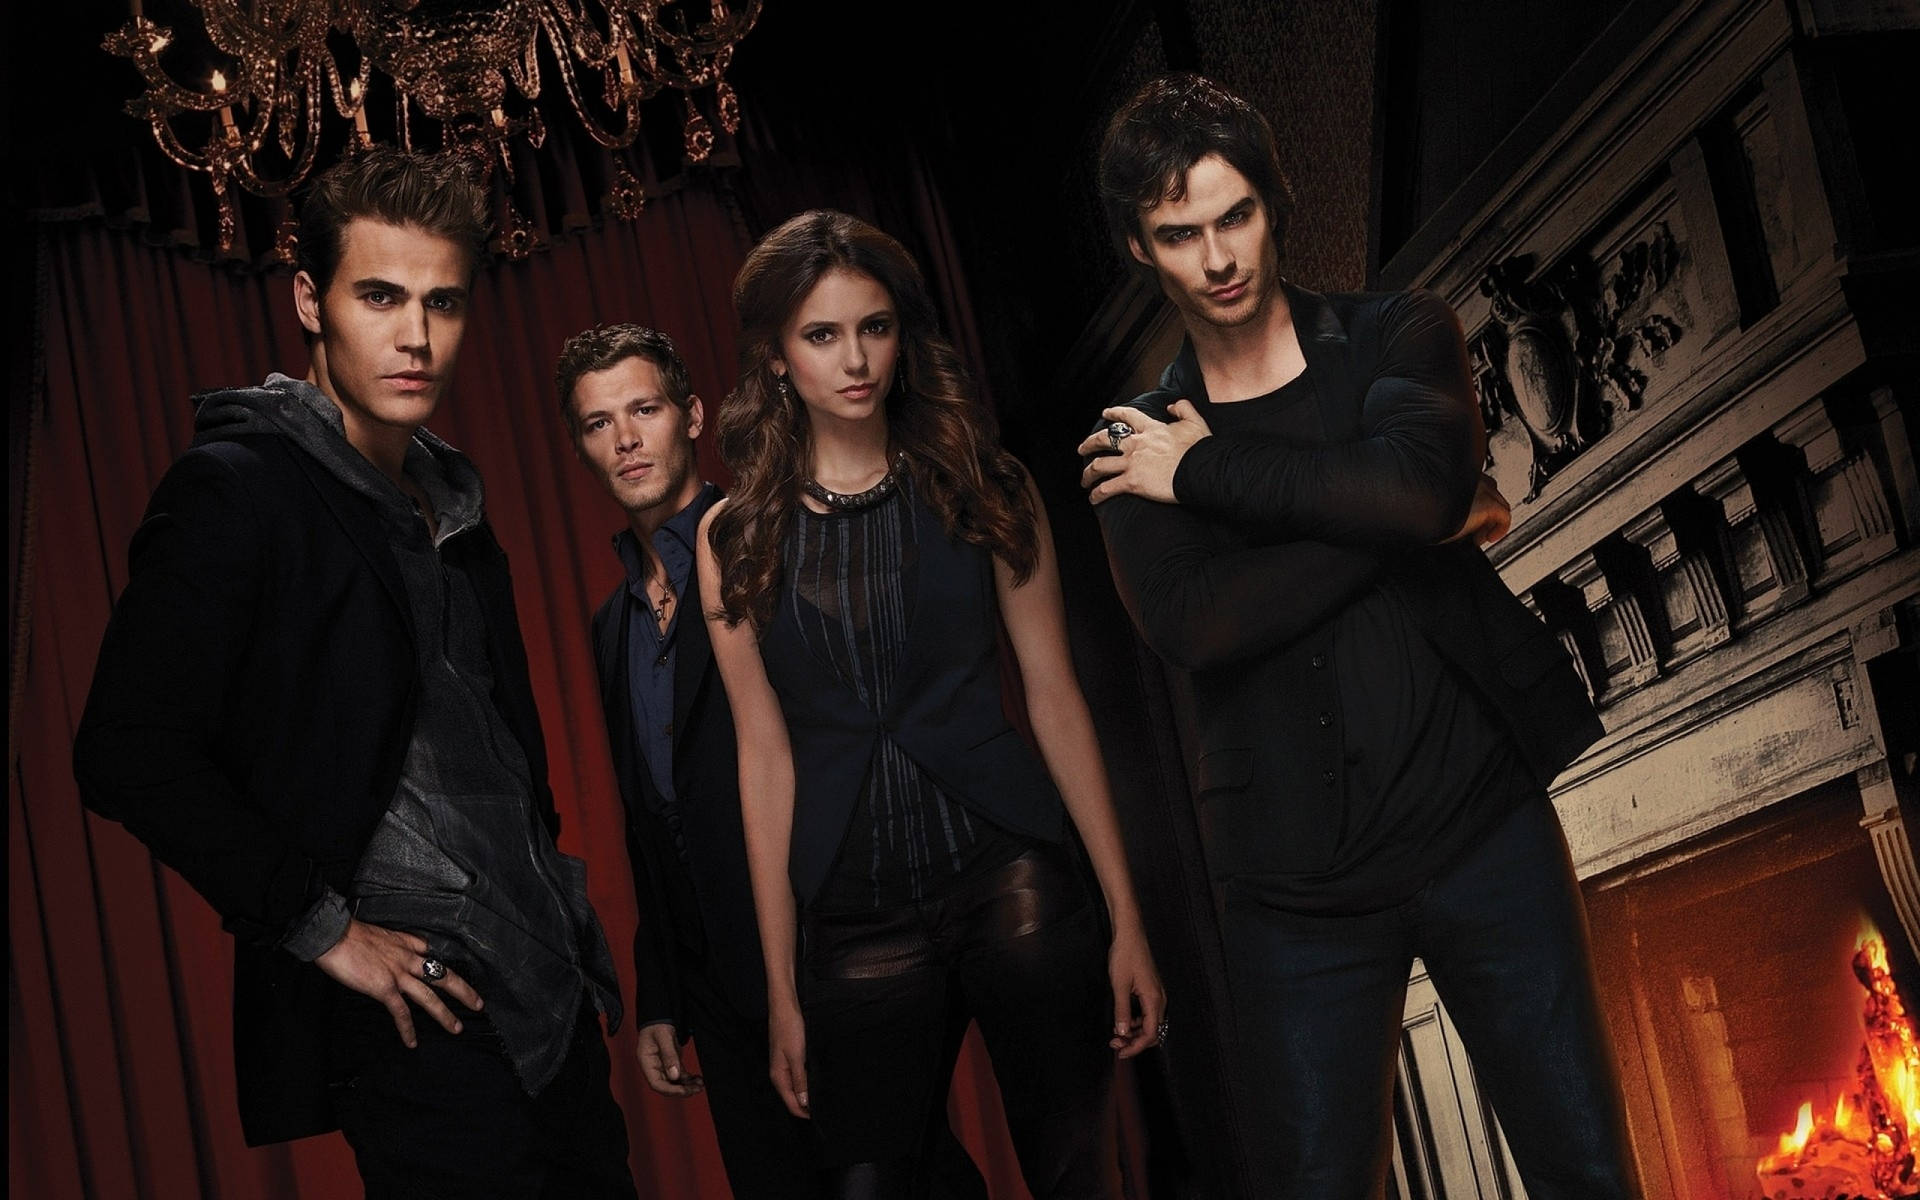 The Vampire Diaries Cast In Old Vintage Study Background